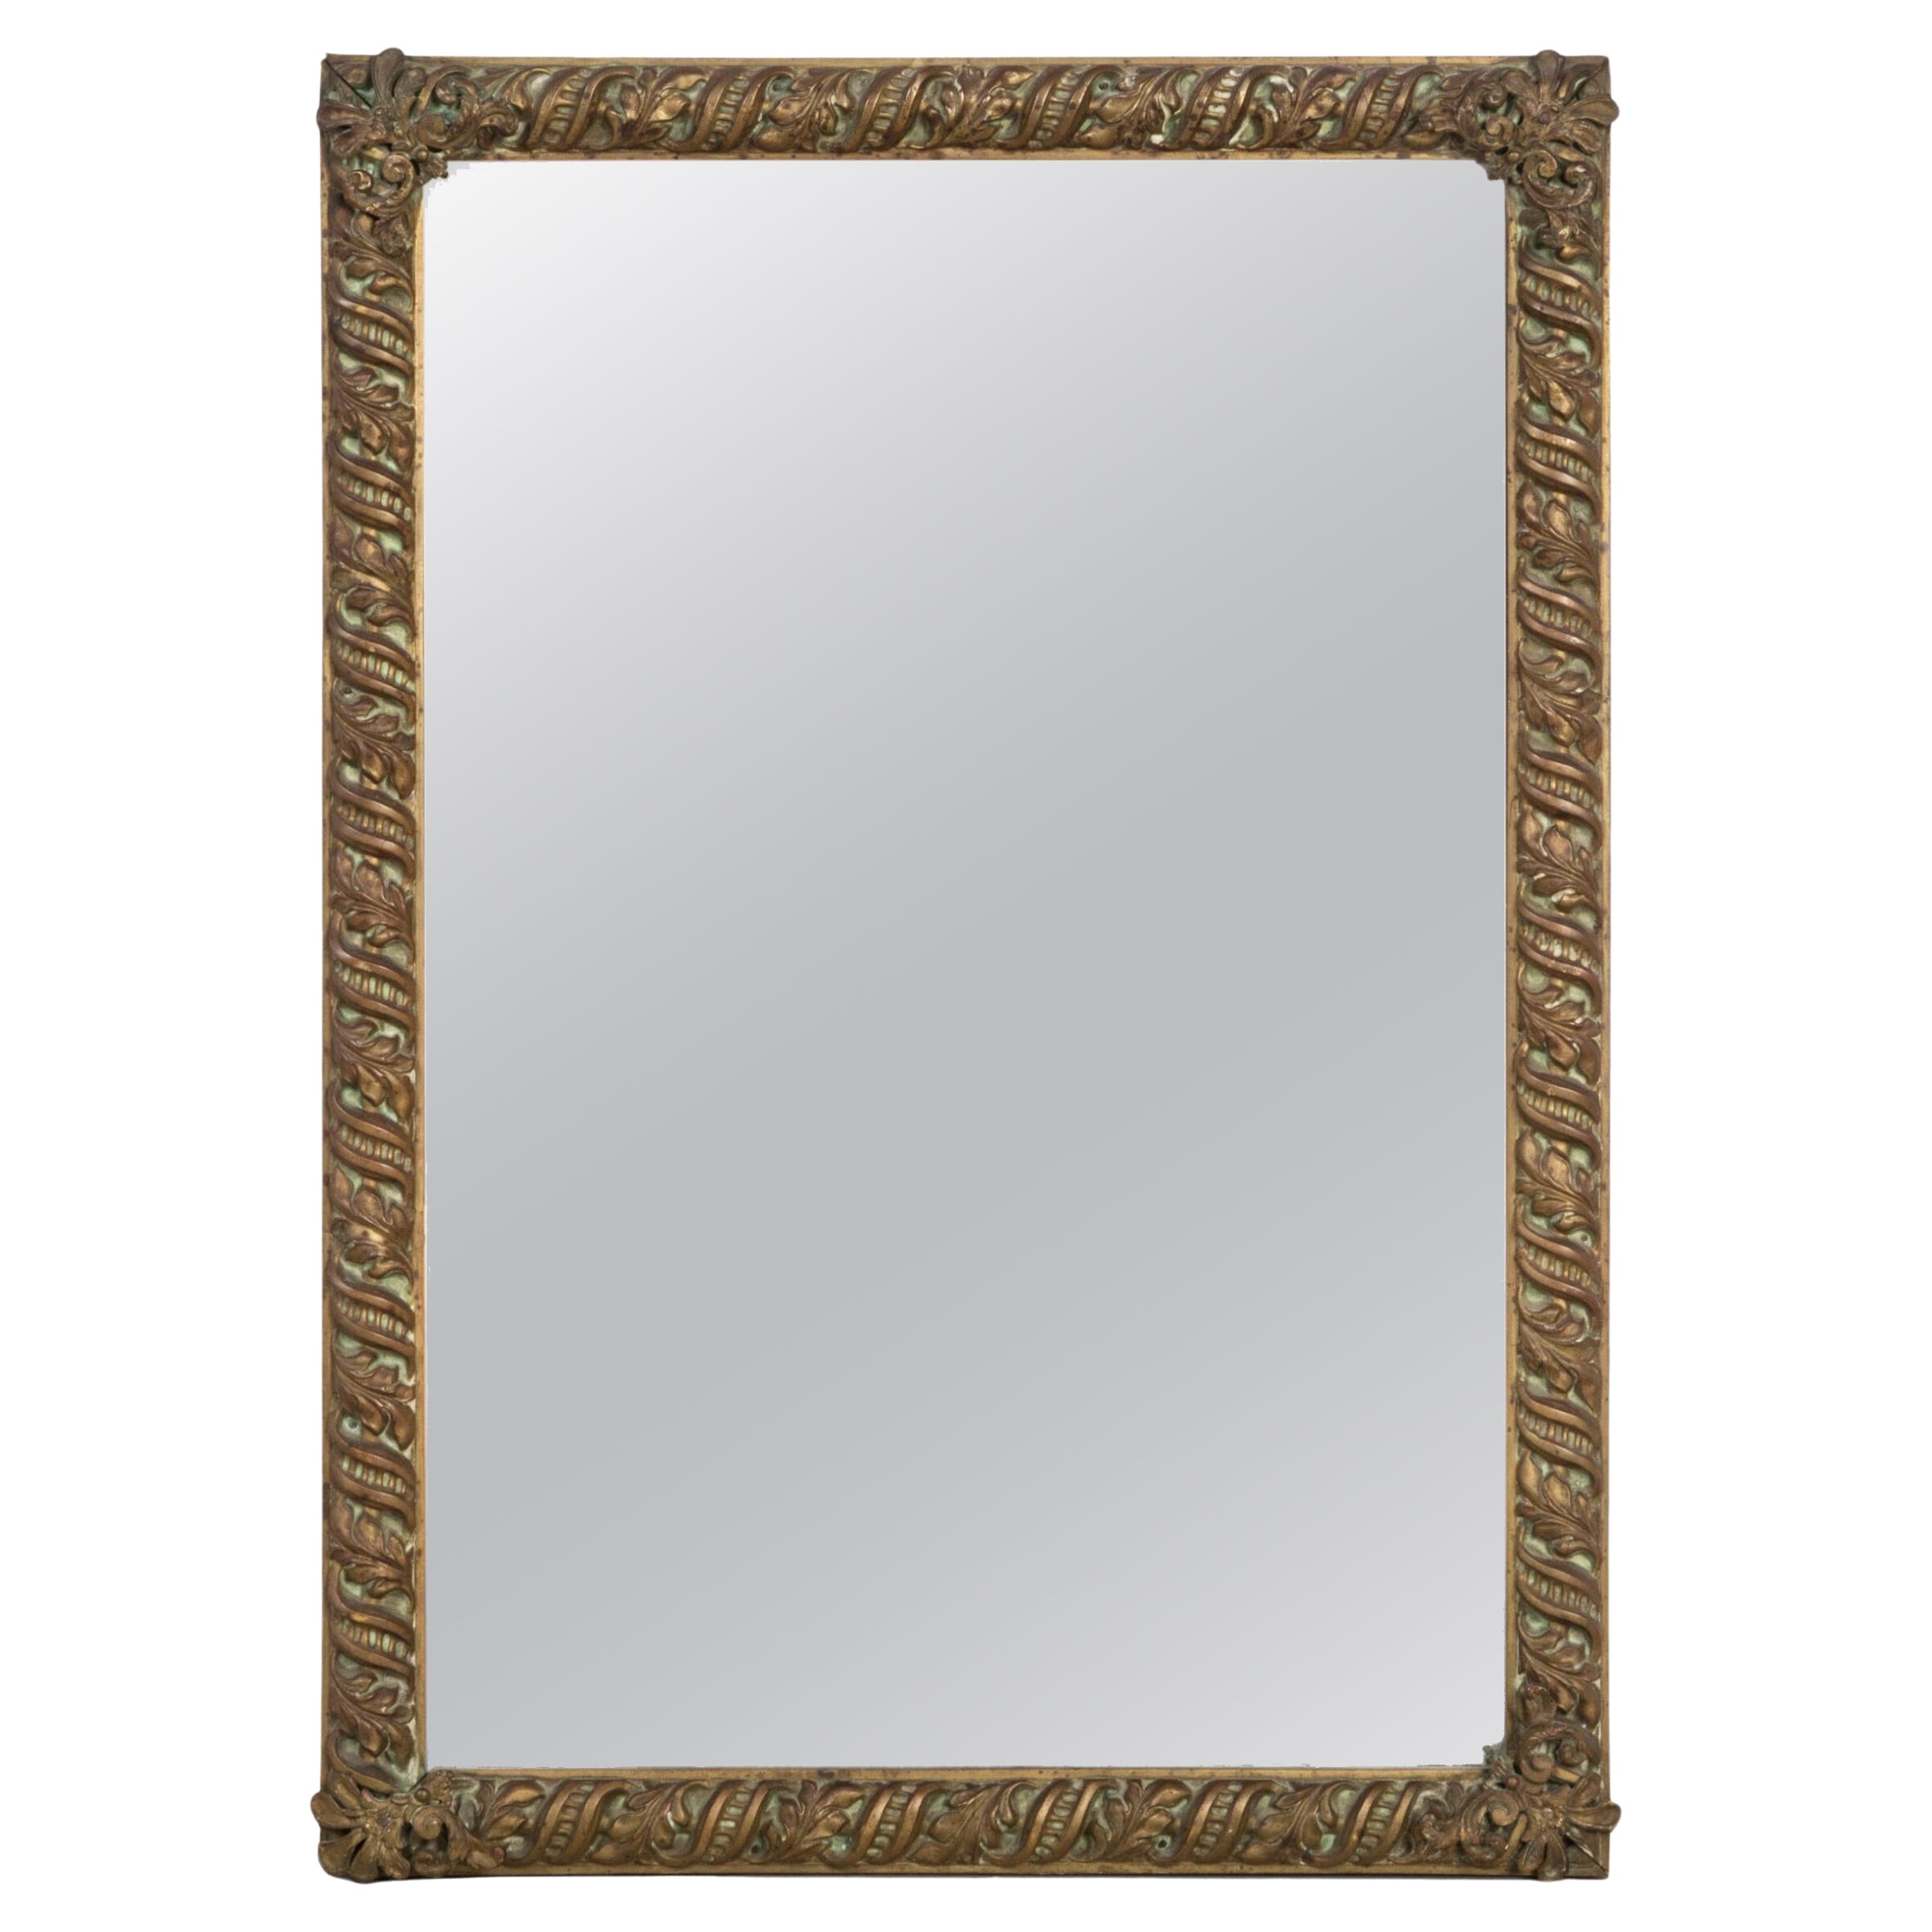 Copper Arts & Crafts Style Rectangular Mirror, Early 20th C